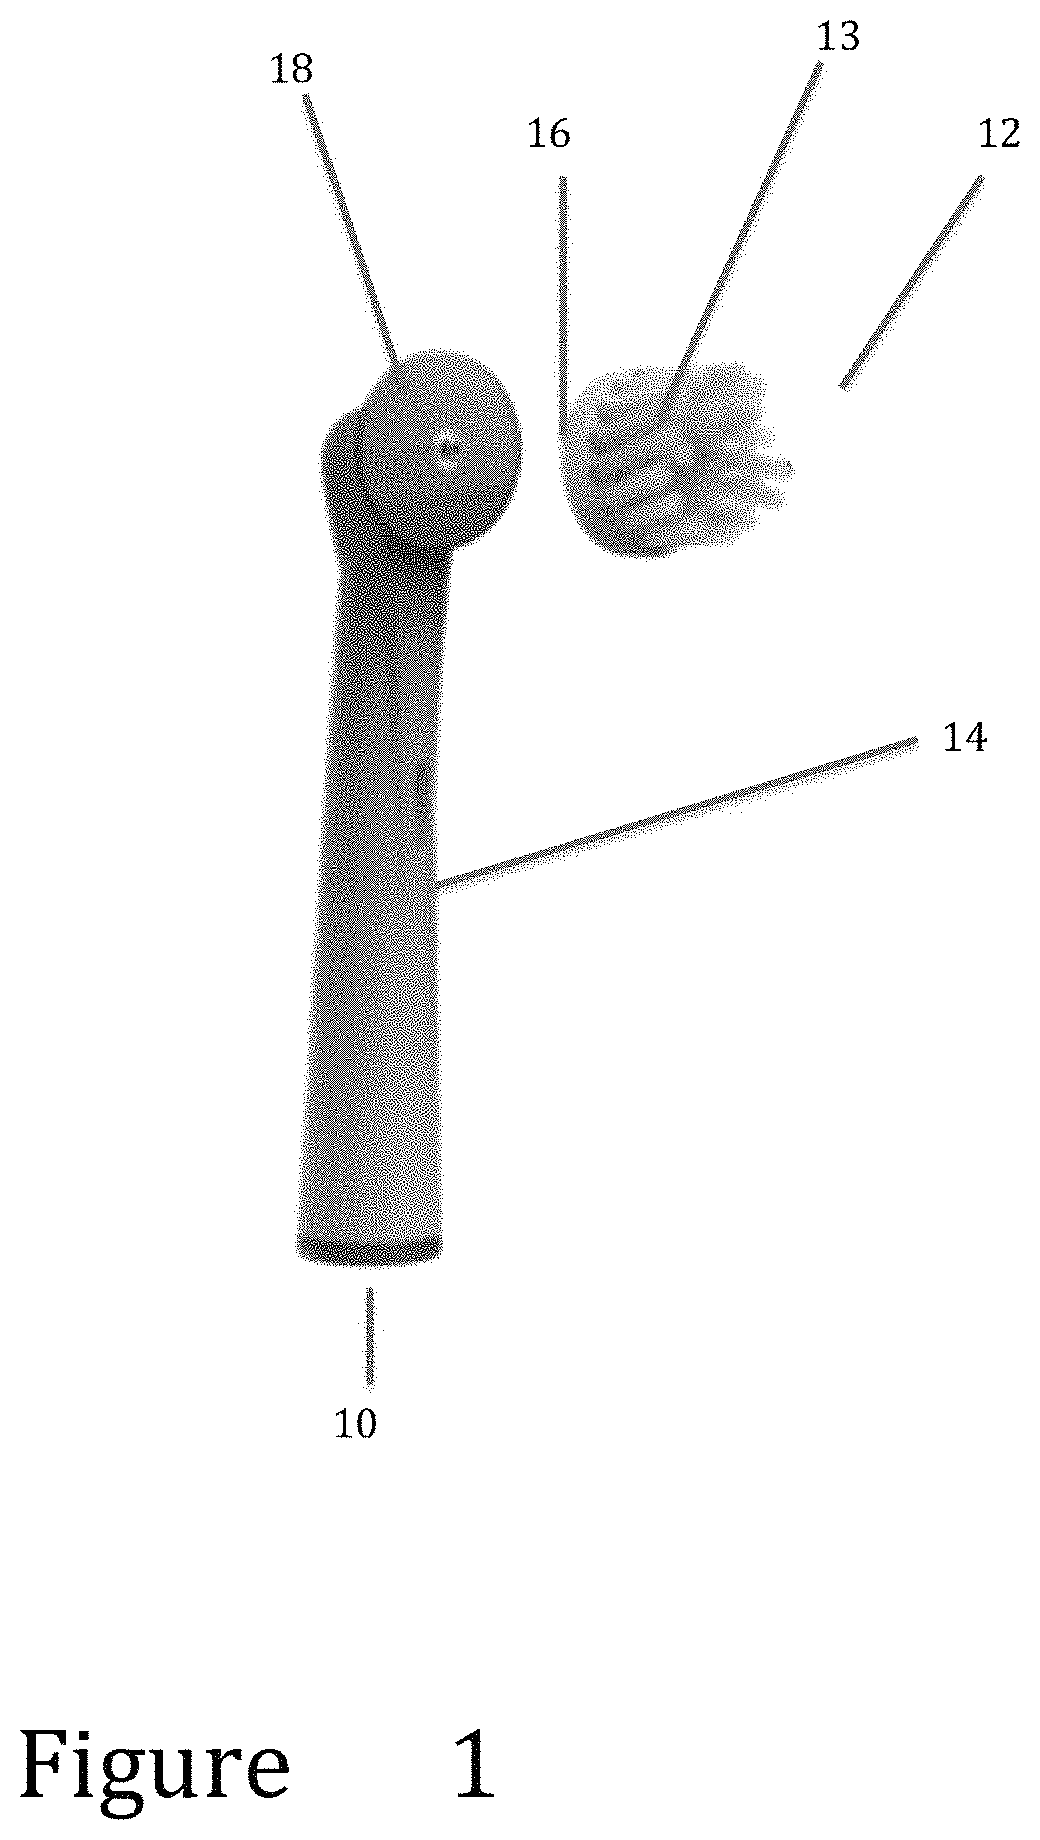 Replacement head assembly for toothbrushing systems